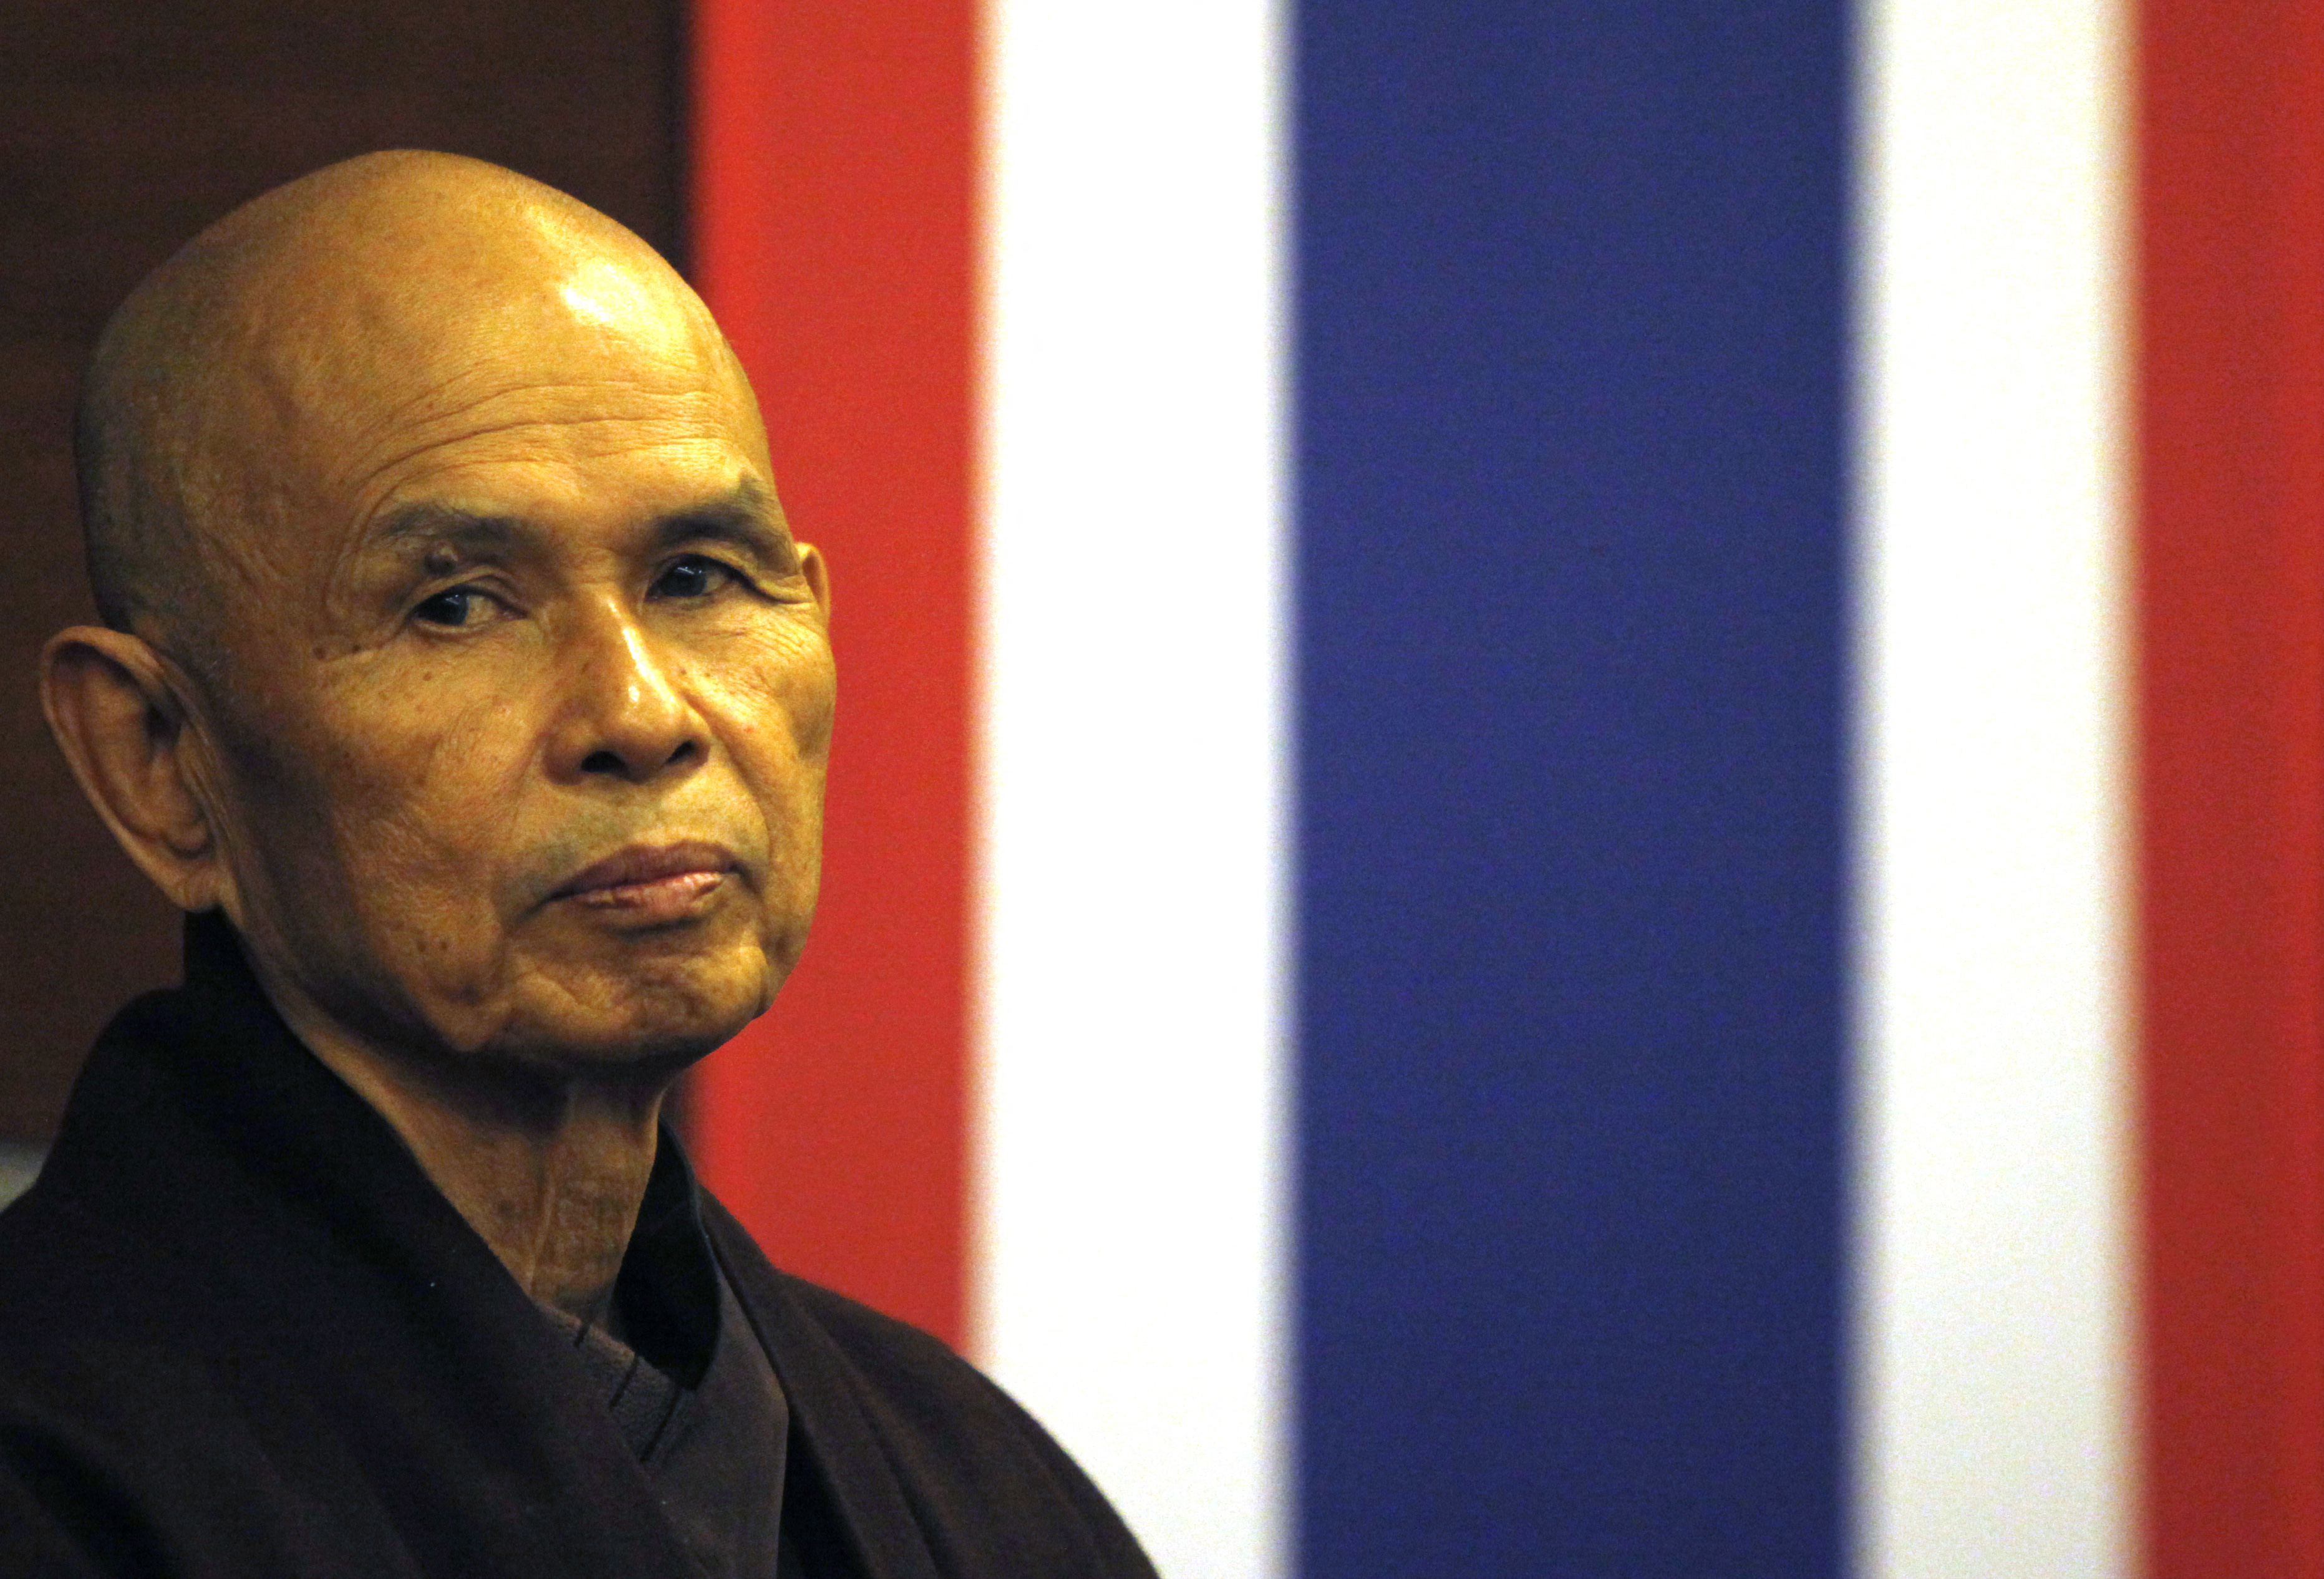 A Teacher of Eternity: A lasting afternoon with Thich Nhat Hanh